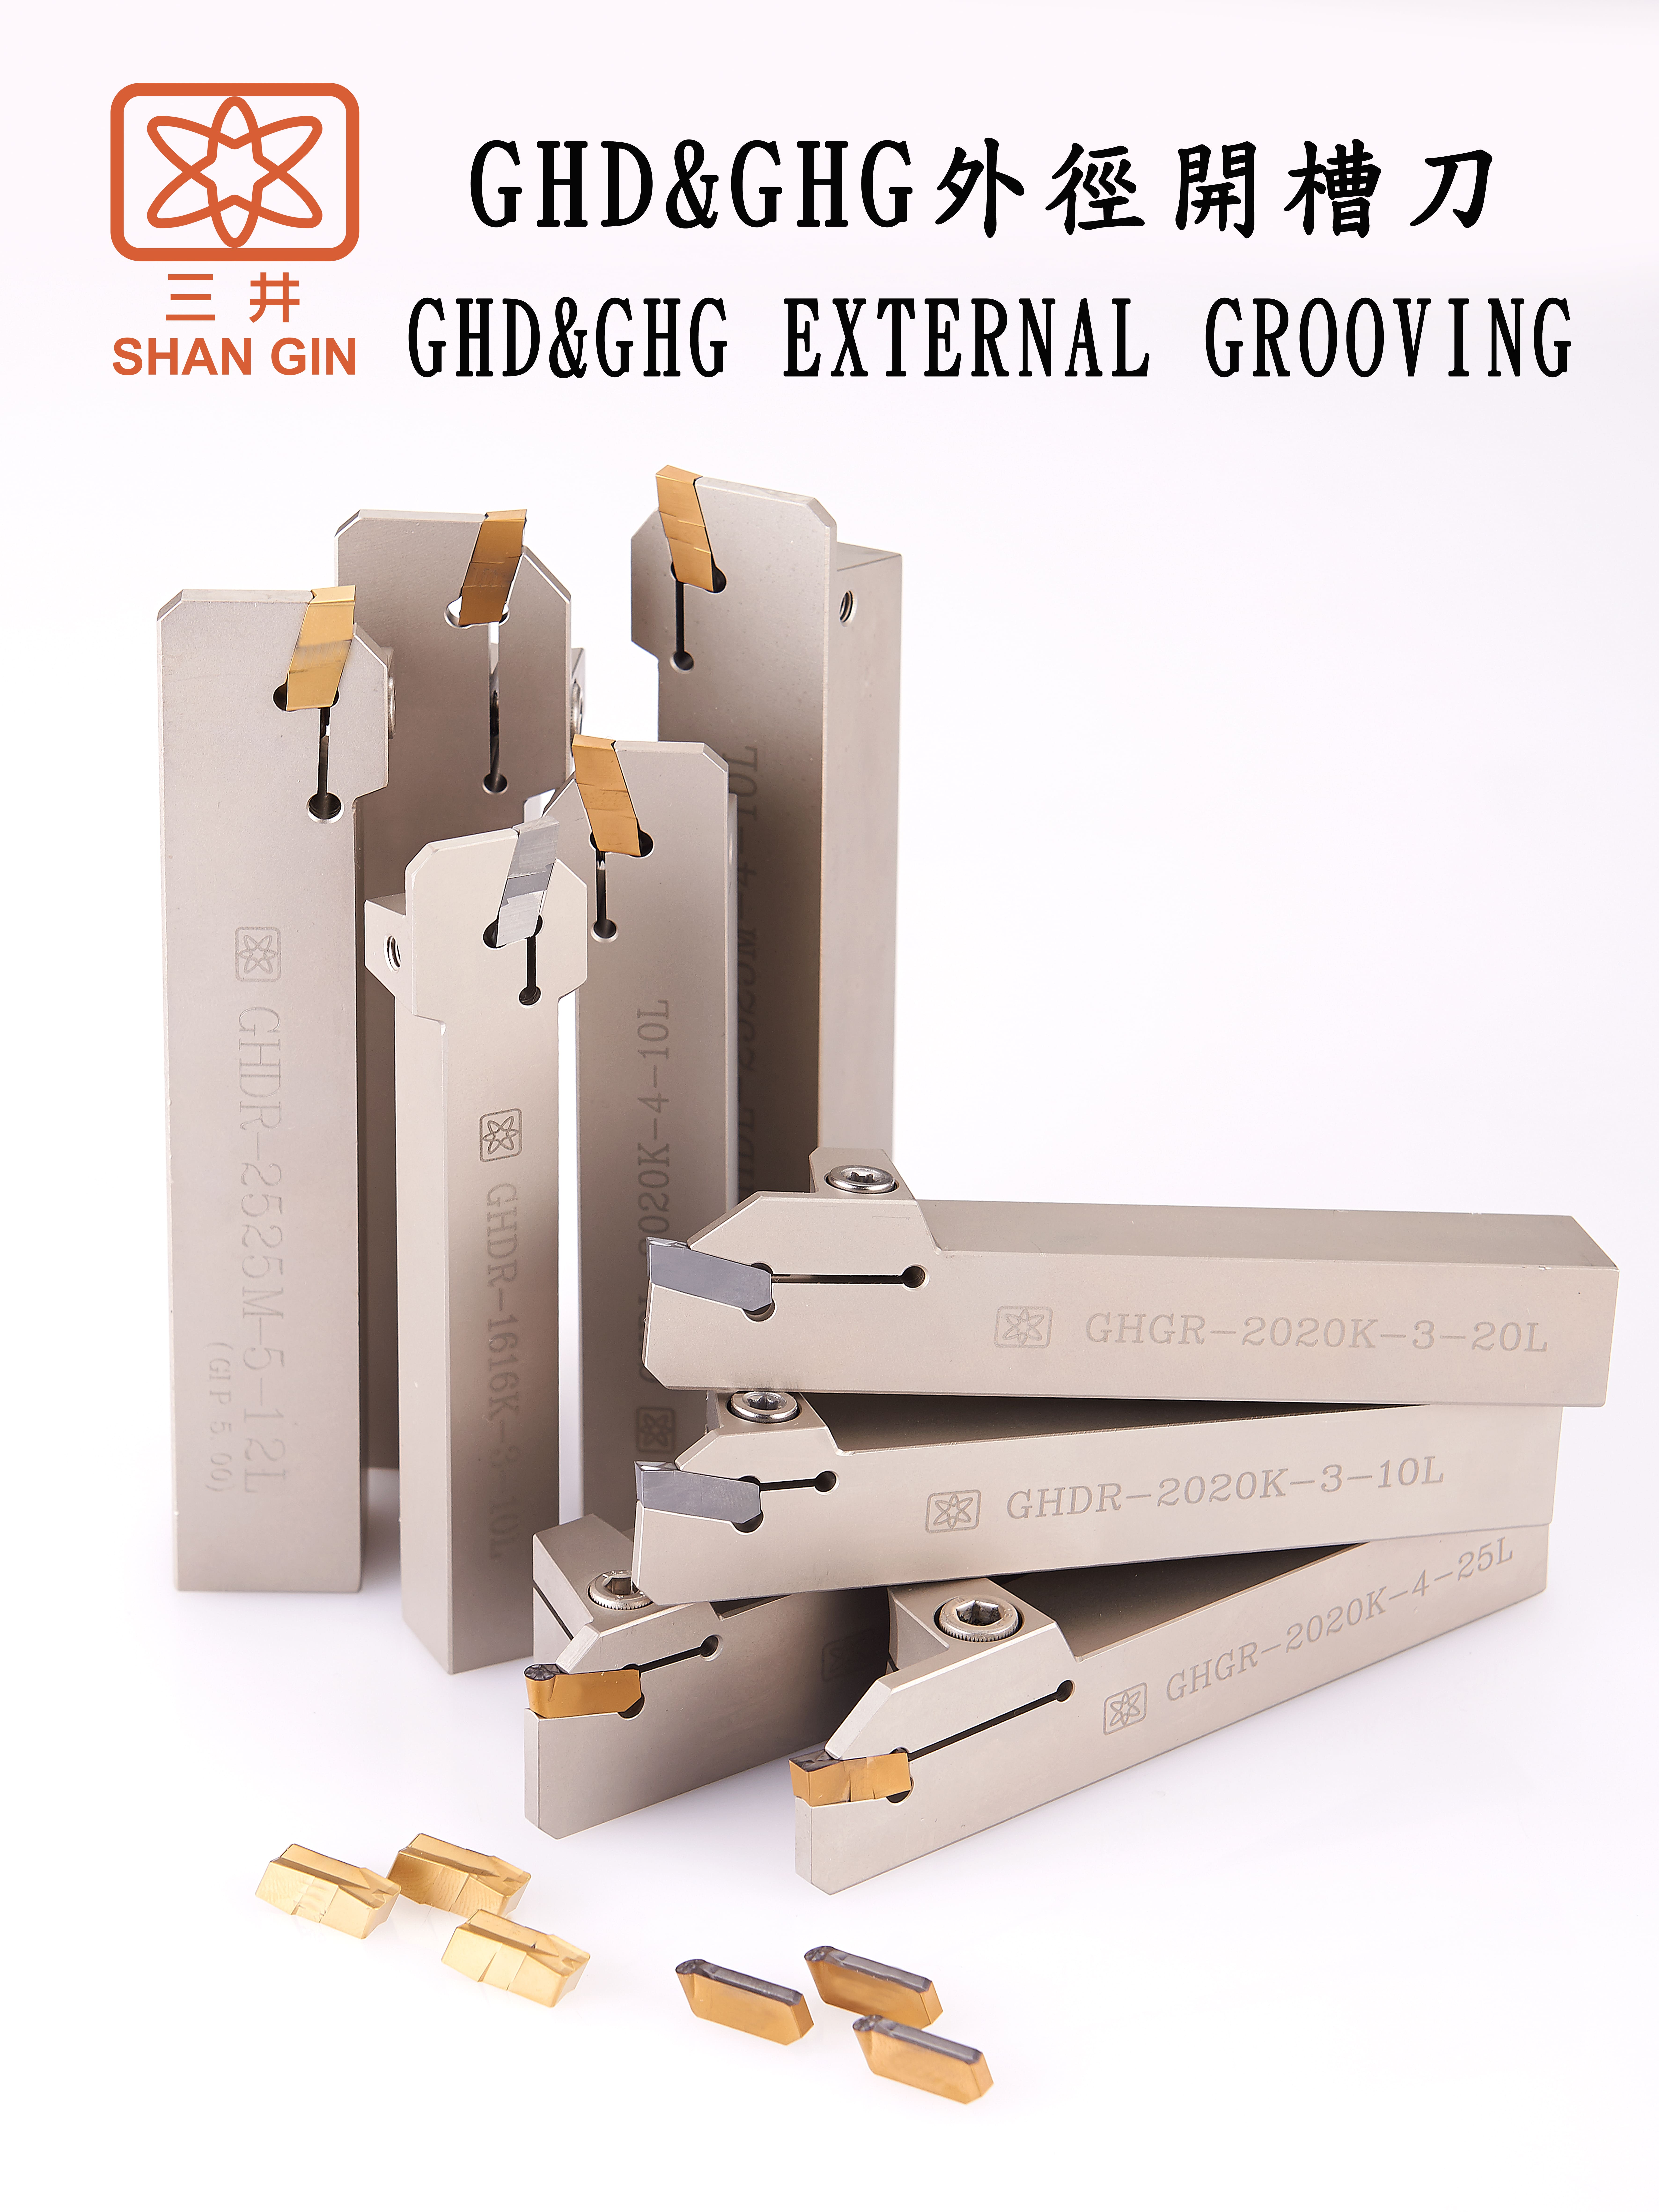 Products|GHD&GHG EXTERNAL GROOVING